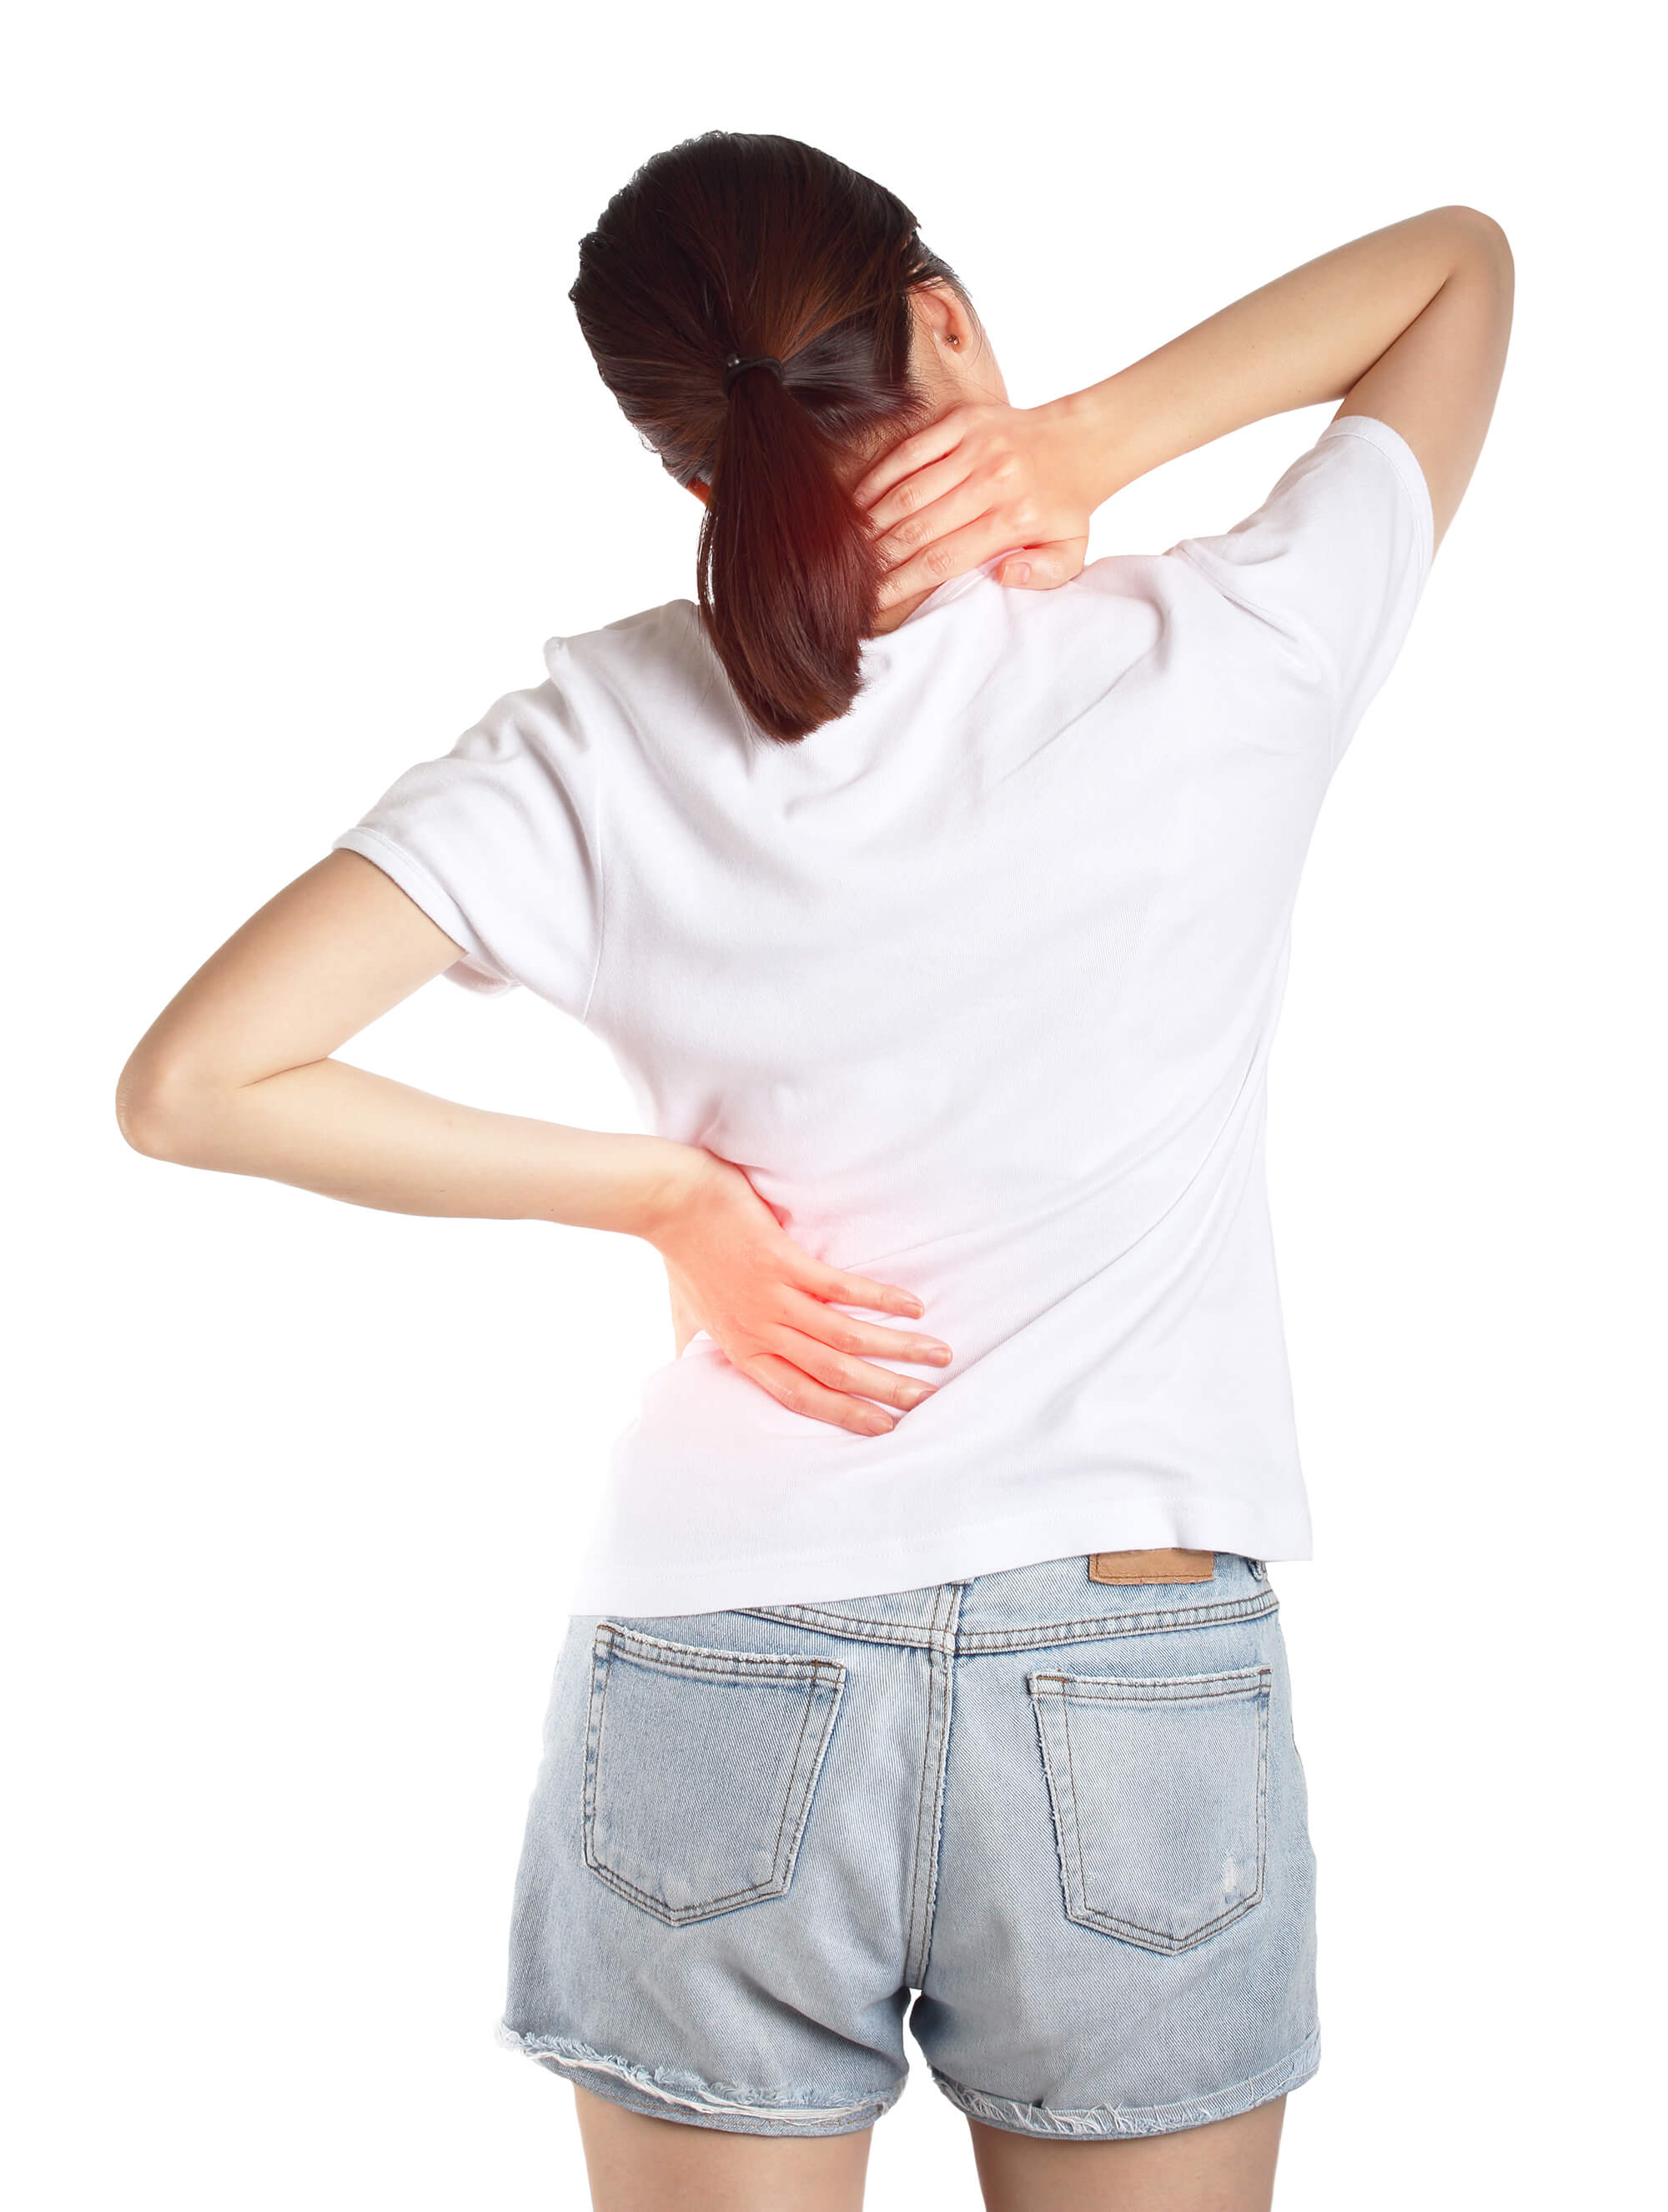 Simple Ways to Relieve Back Pain